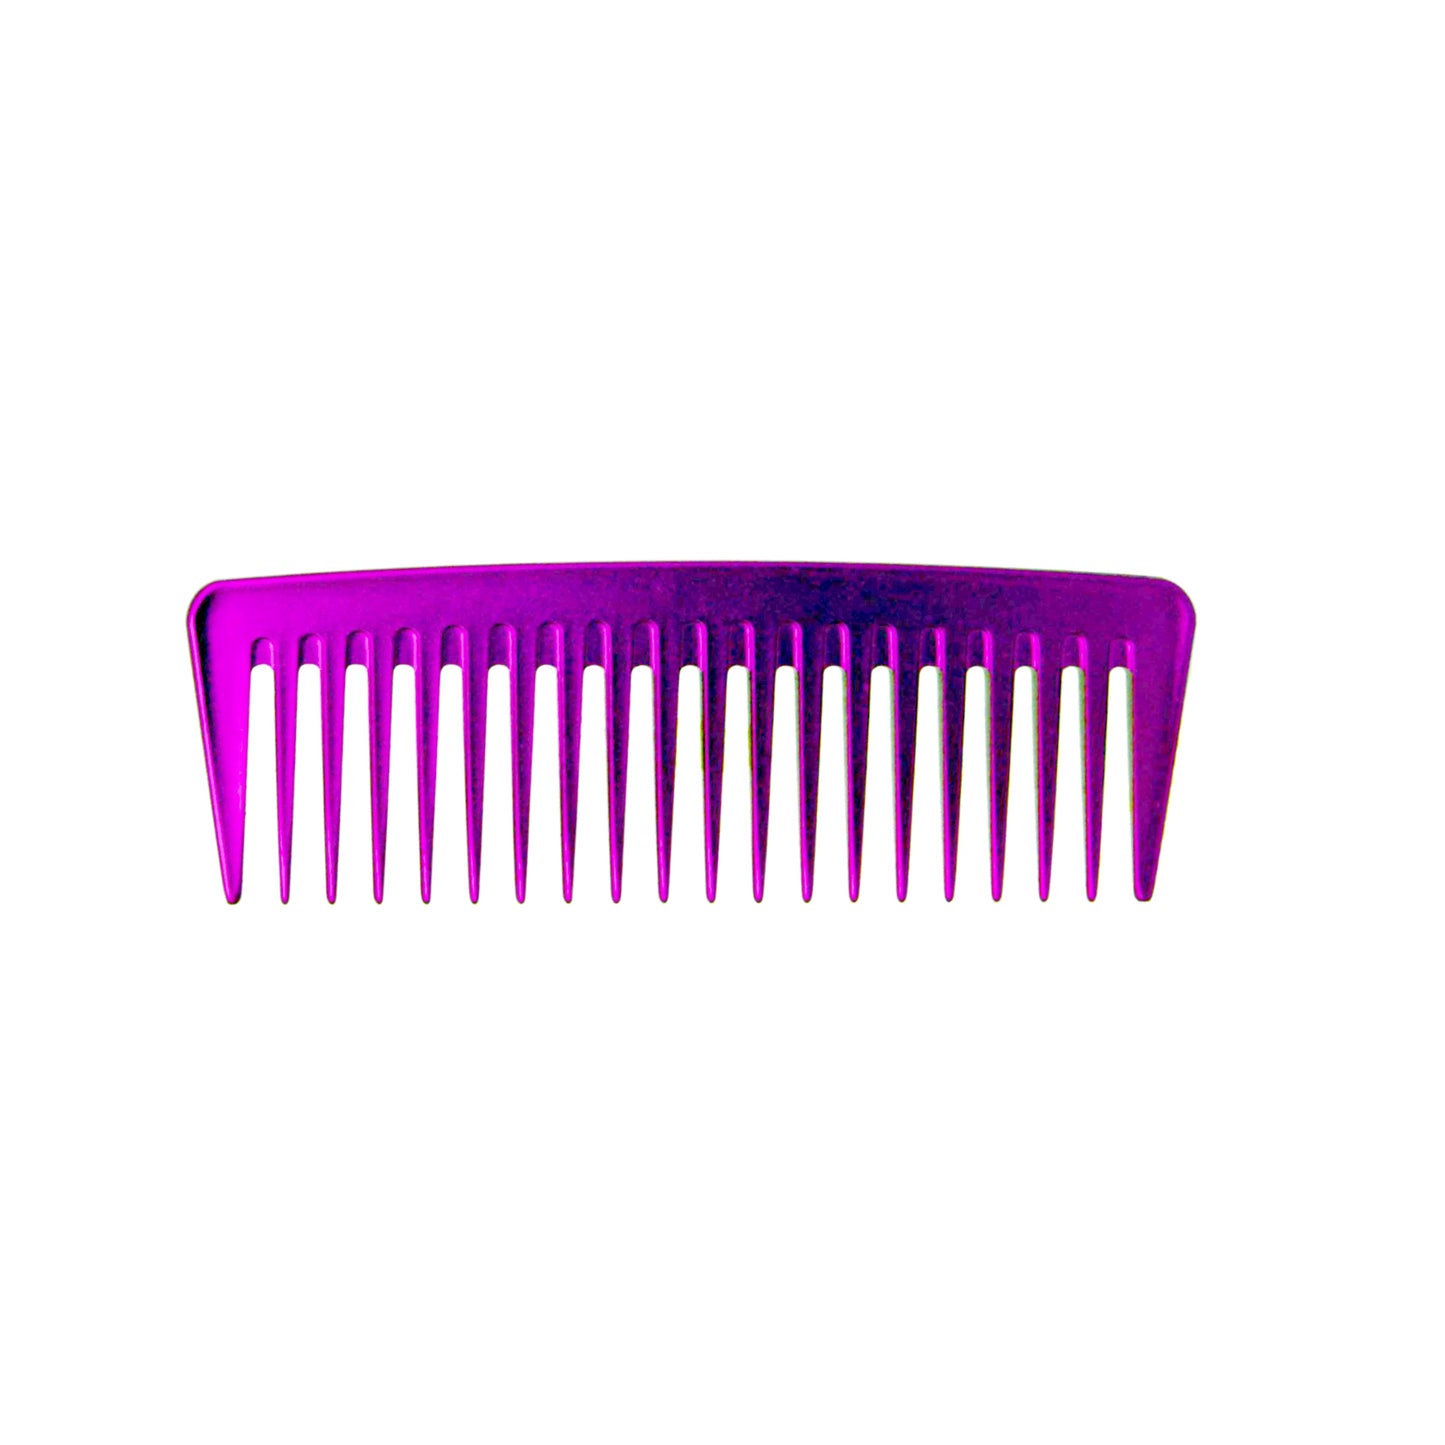 Pegasus MICOLOR 404, 7in Hard Rubber Wide Tooth Tall Styling Comb, Handmade, Seamless, Smooth Edges, Anti Static, Heat and Chemically Resistant, Wet Hair, Everyday Grooming Comb | Peines de goma dura - Pink